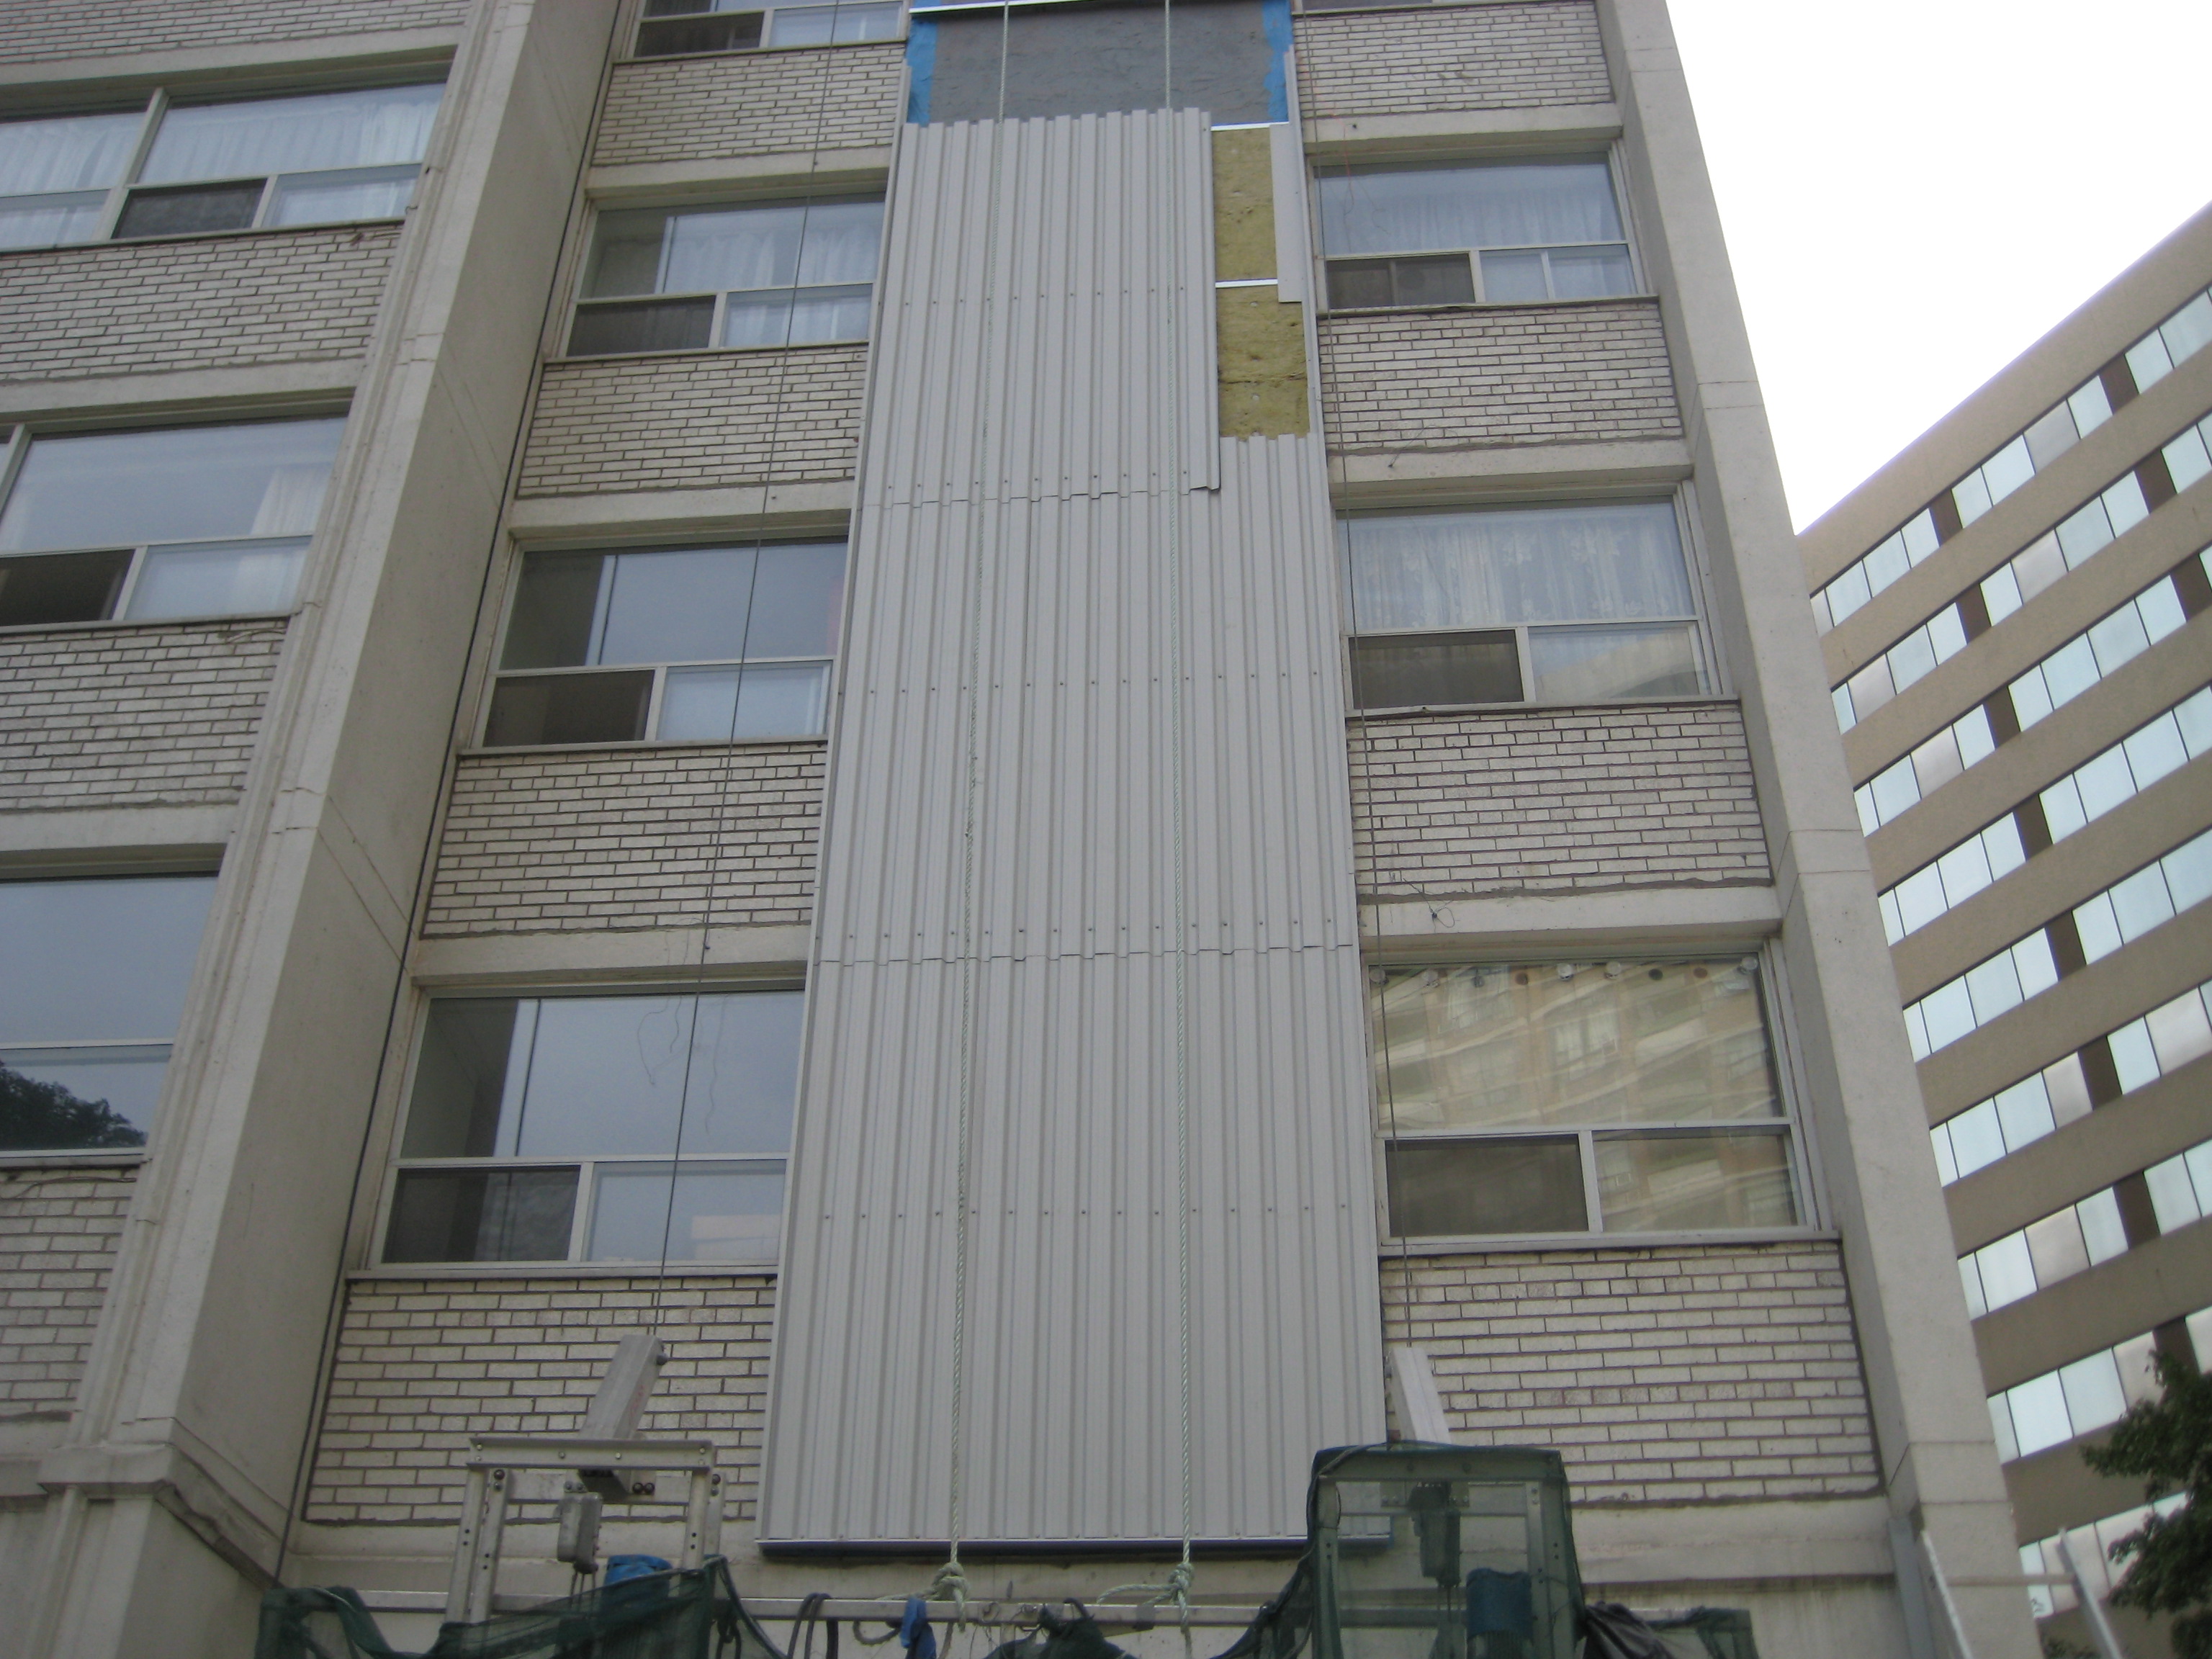 Final Stages of Exterior Wall Cladding Renovation